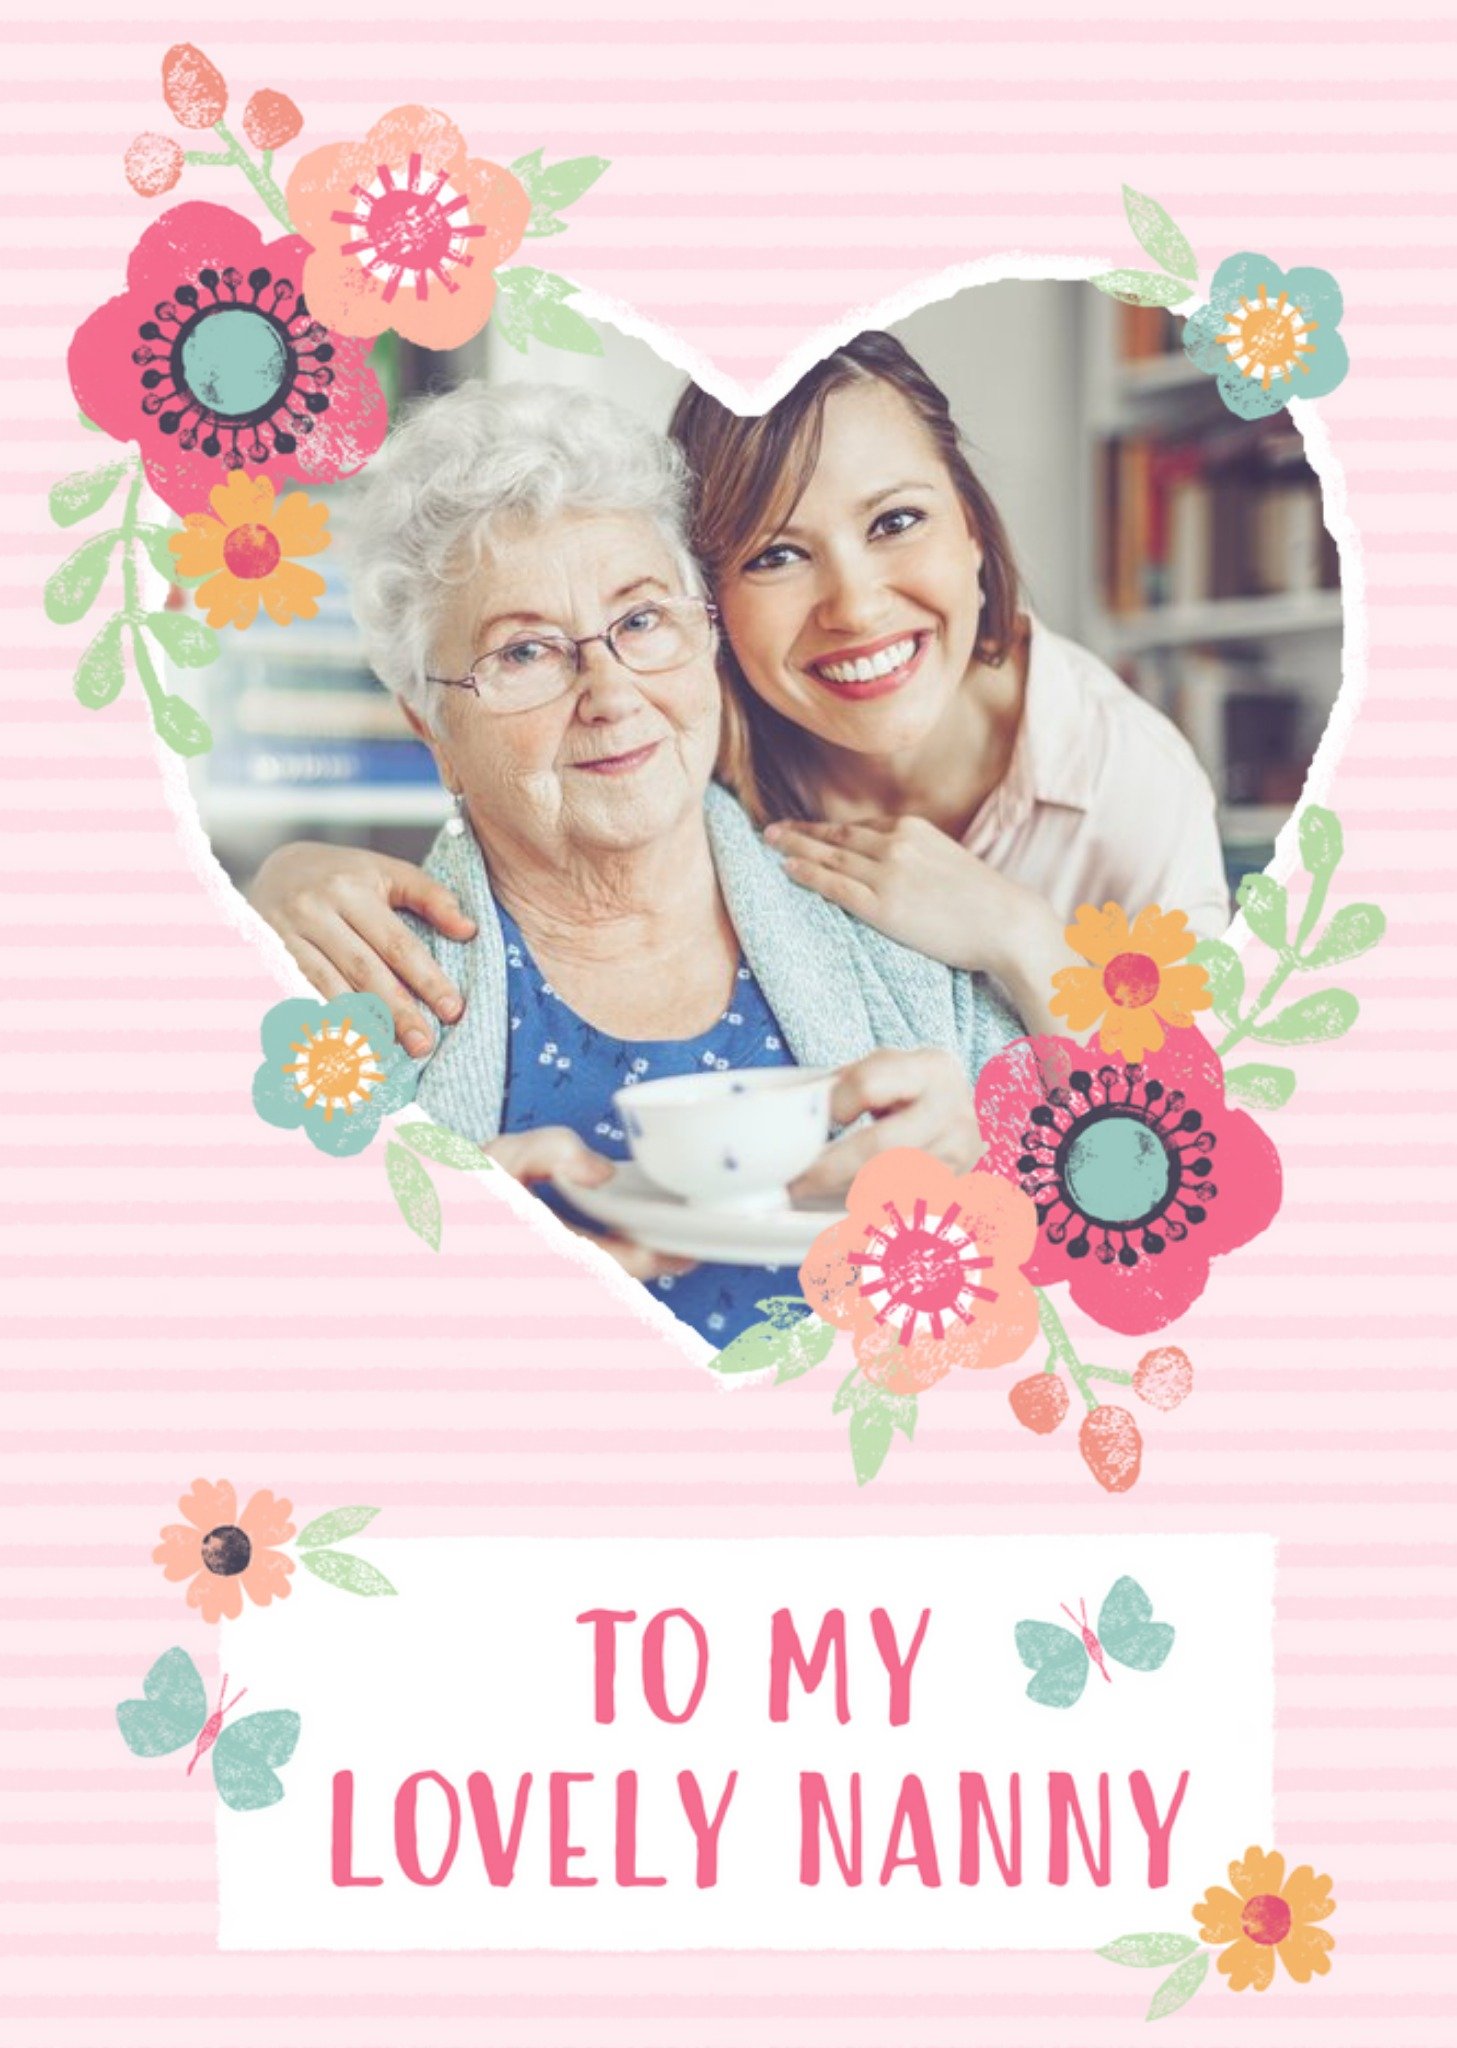 Moonpig Striped And Flower Design To My Lovely Nanny Mothers Day Photo Card Ecard